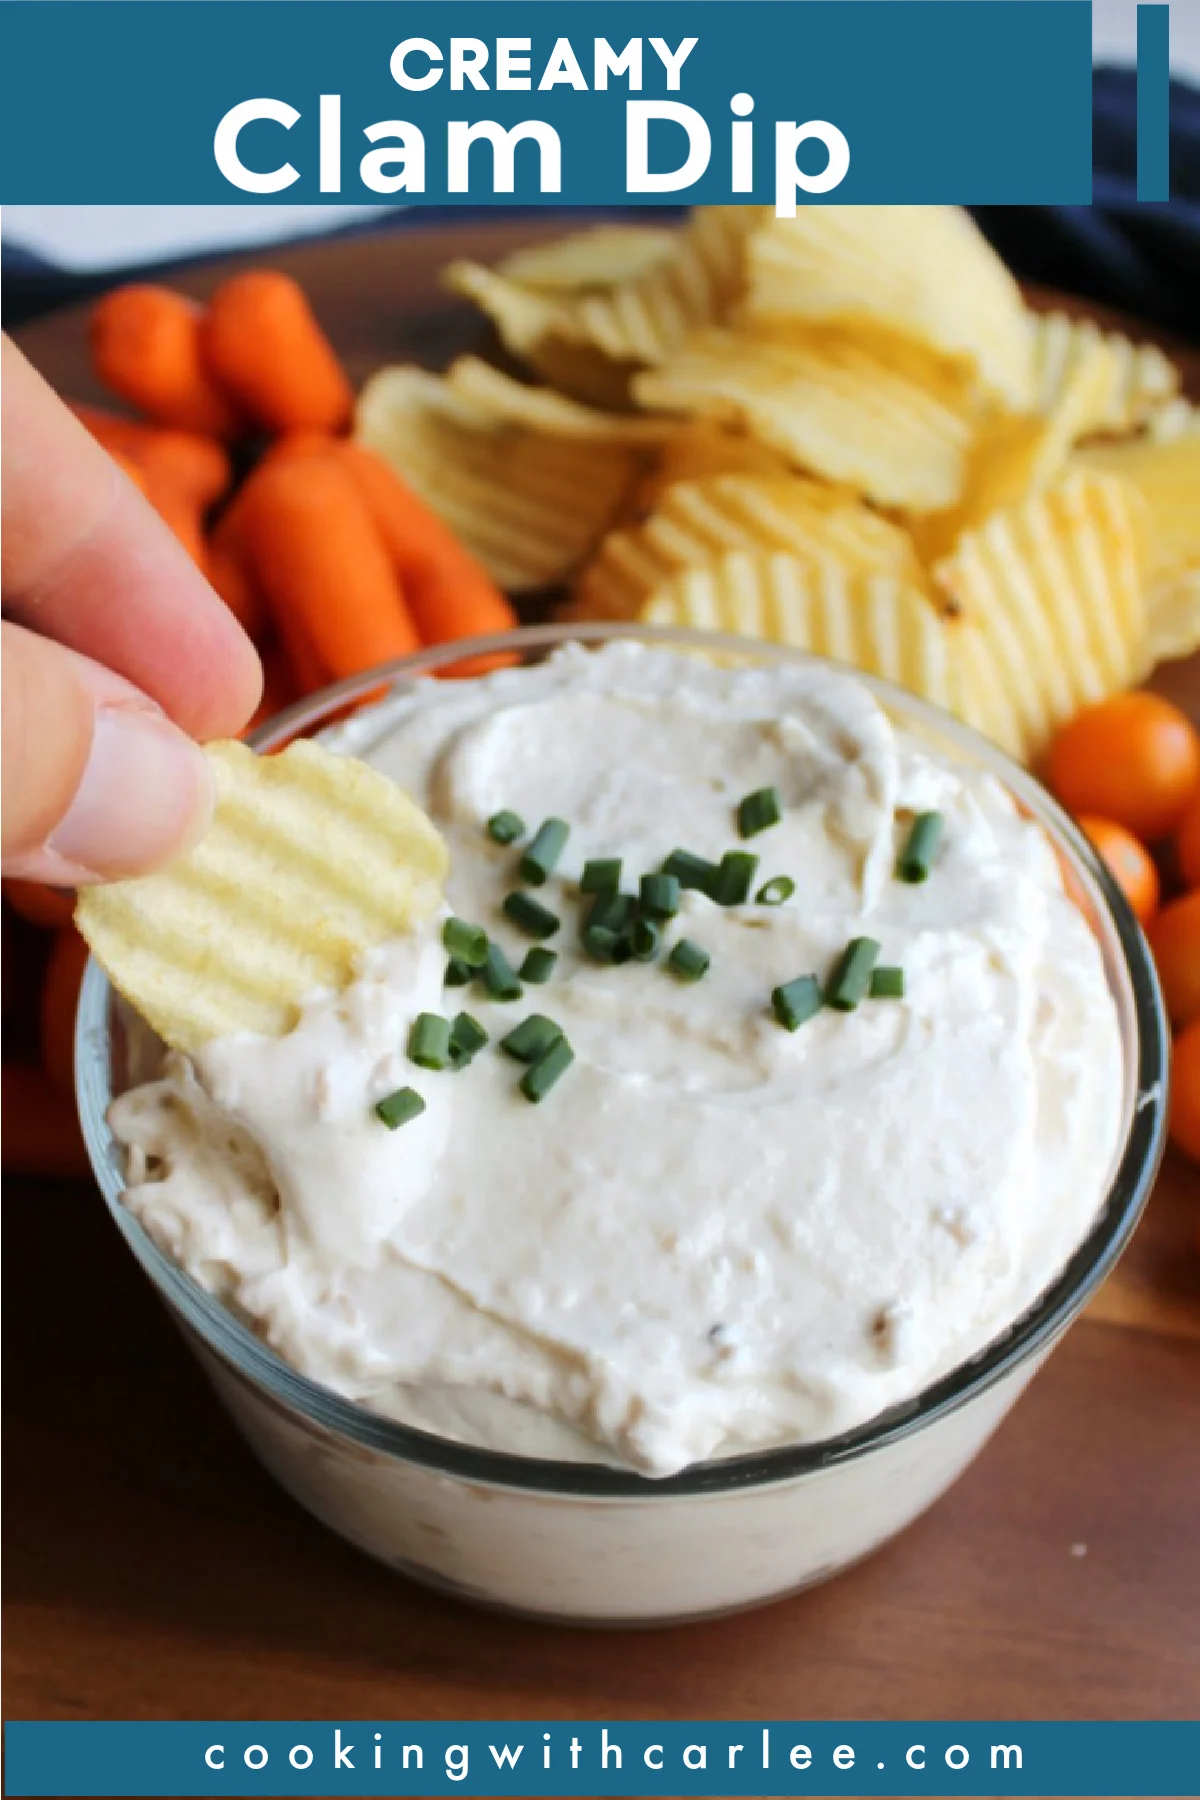 This creamy clam dip is a perfect party appetizer. It comes together quickly and is a perfect make ahead snack.